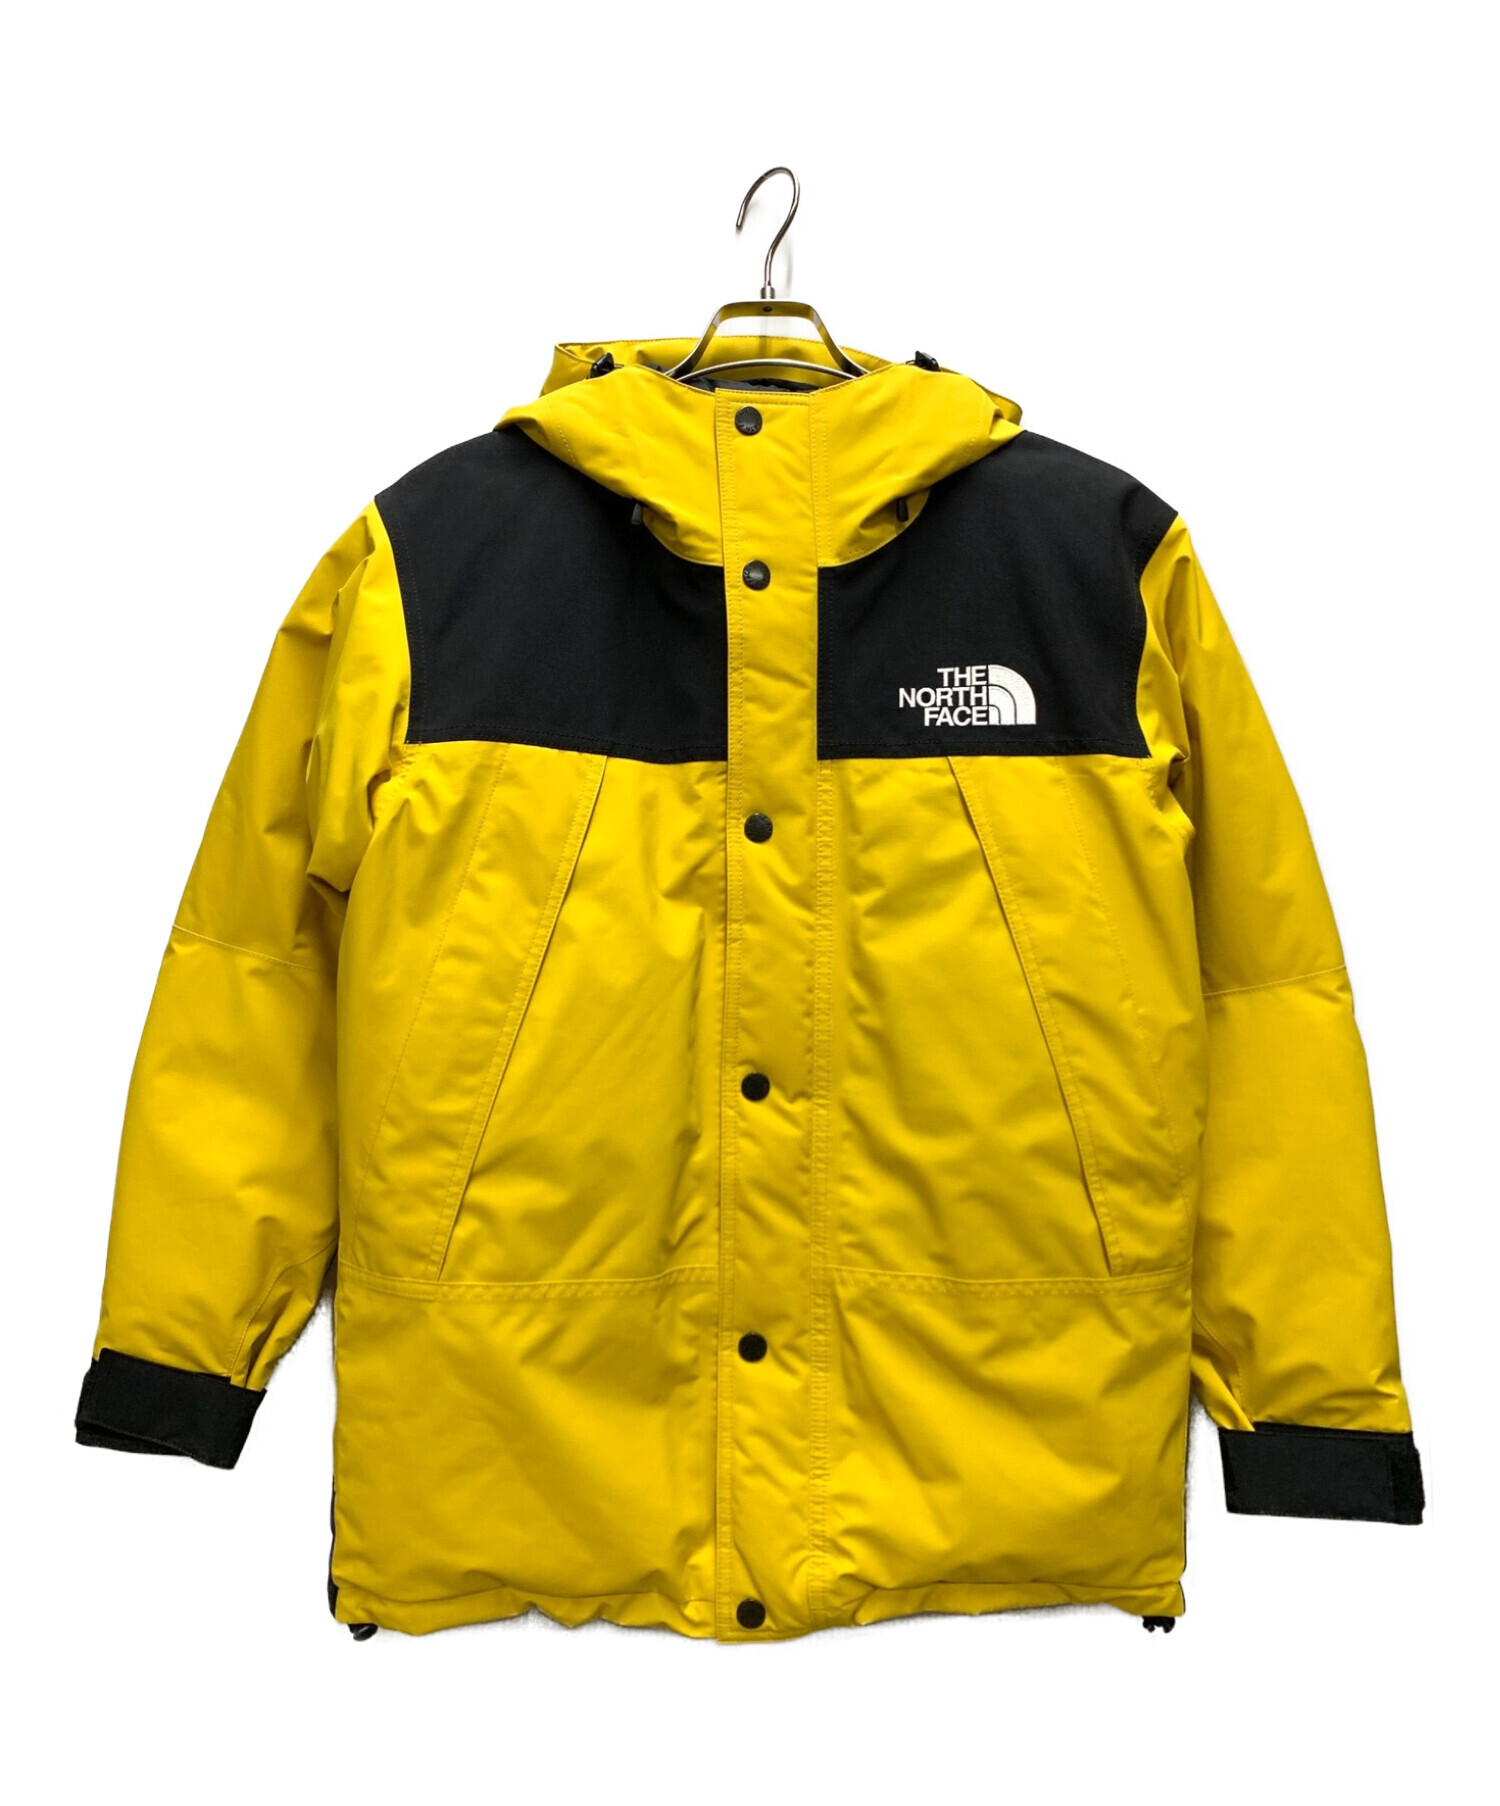 The North Face ジャケット　イエロー　新品未使用